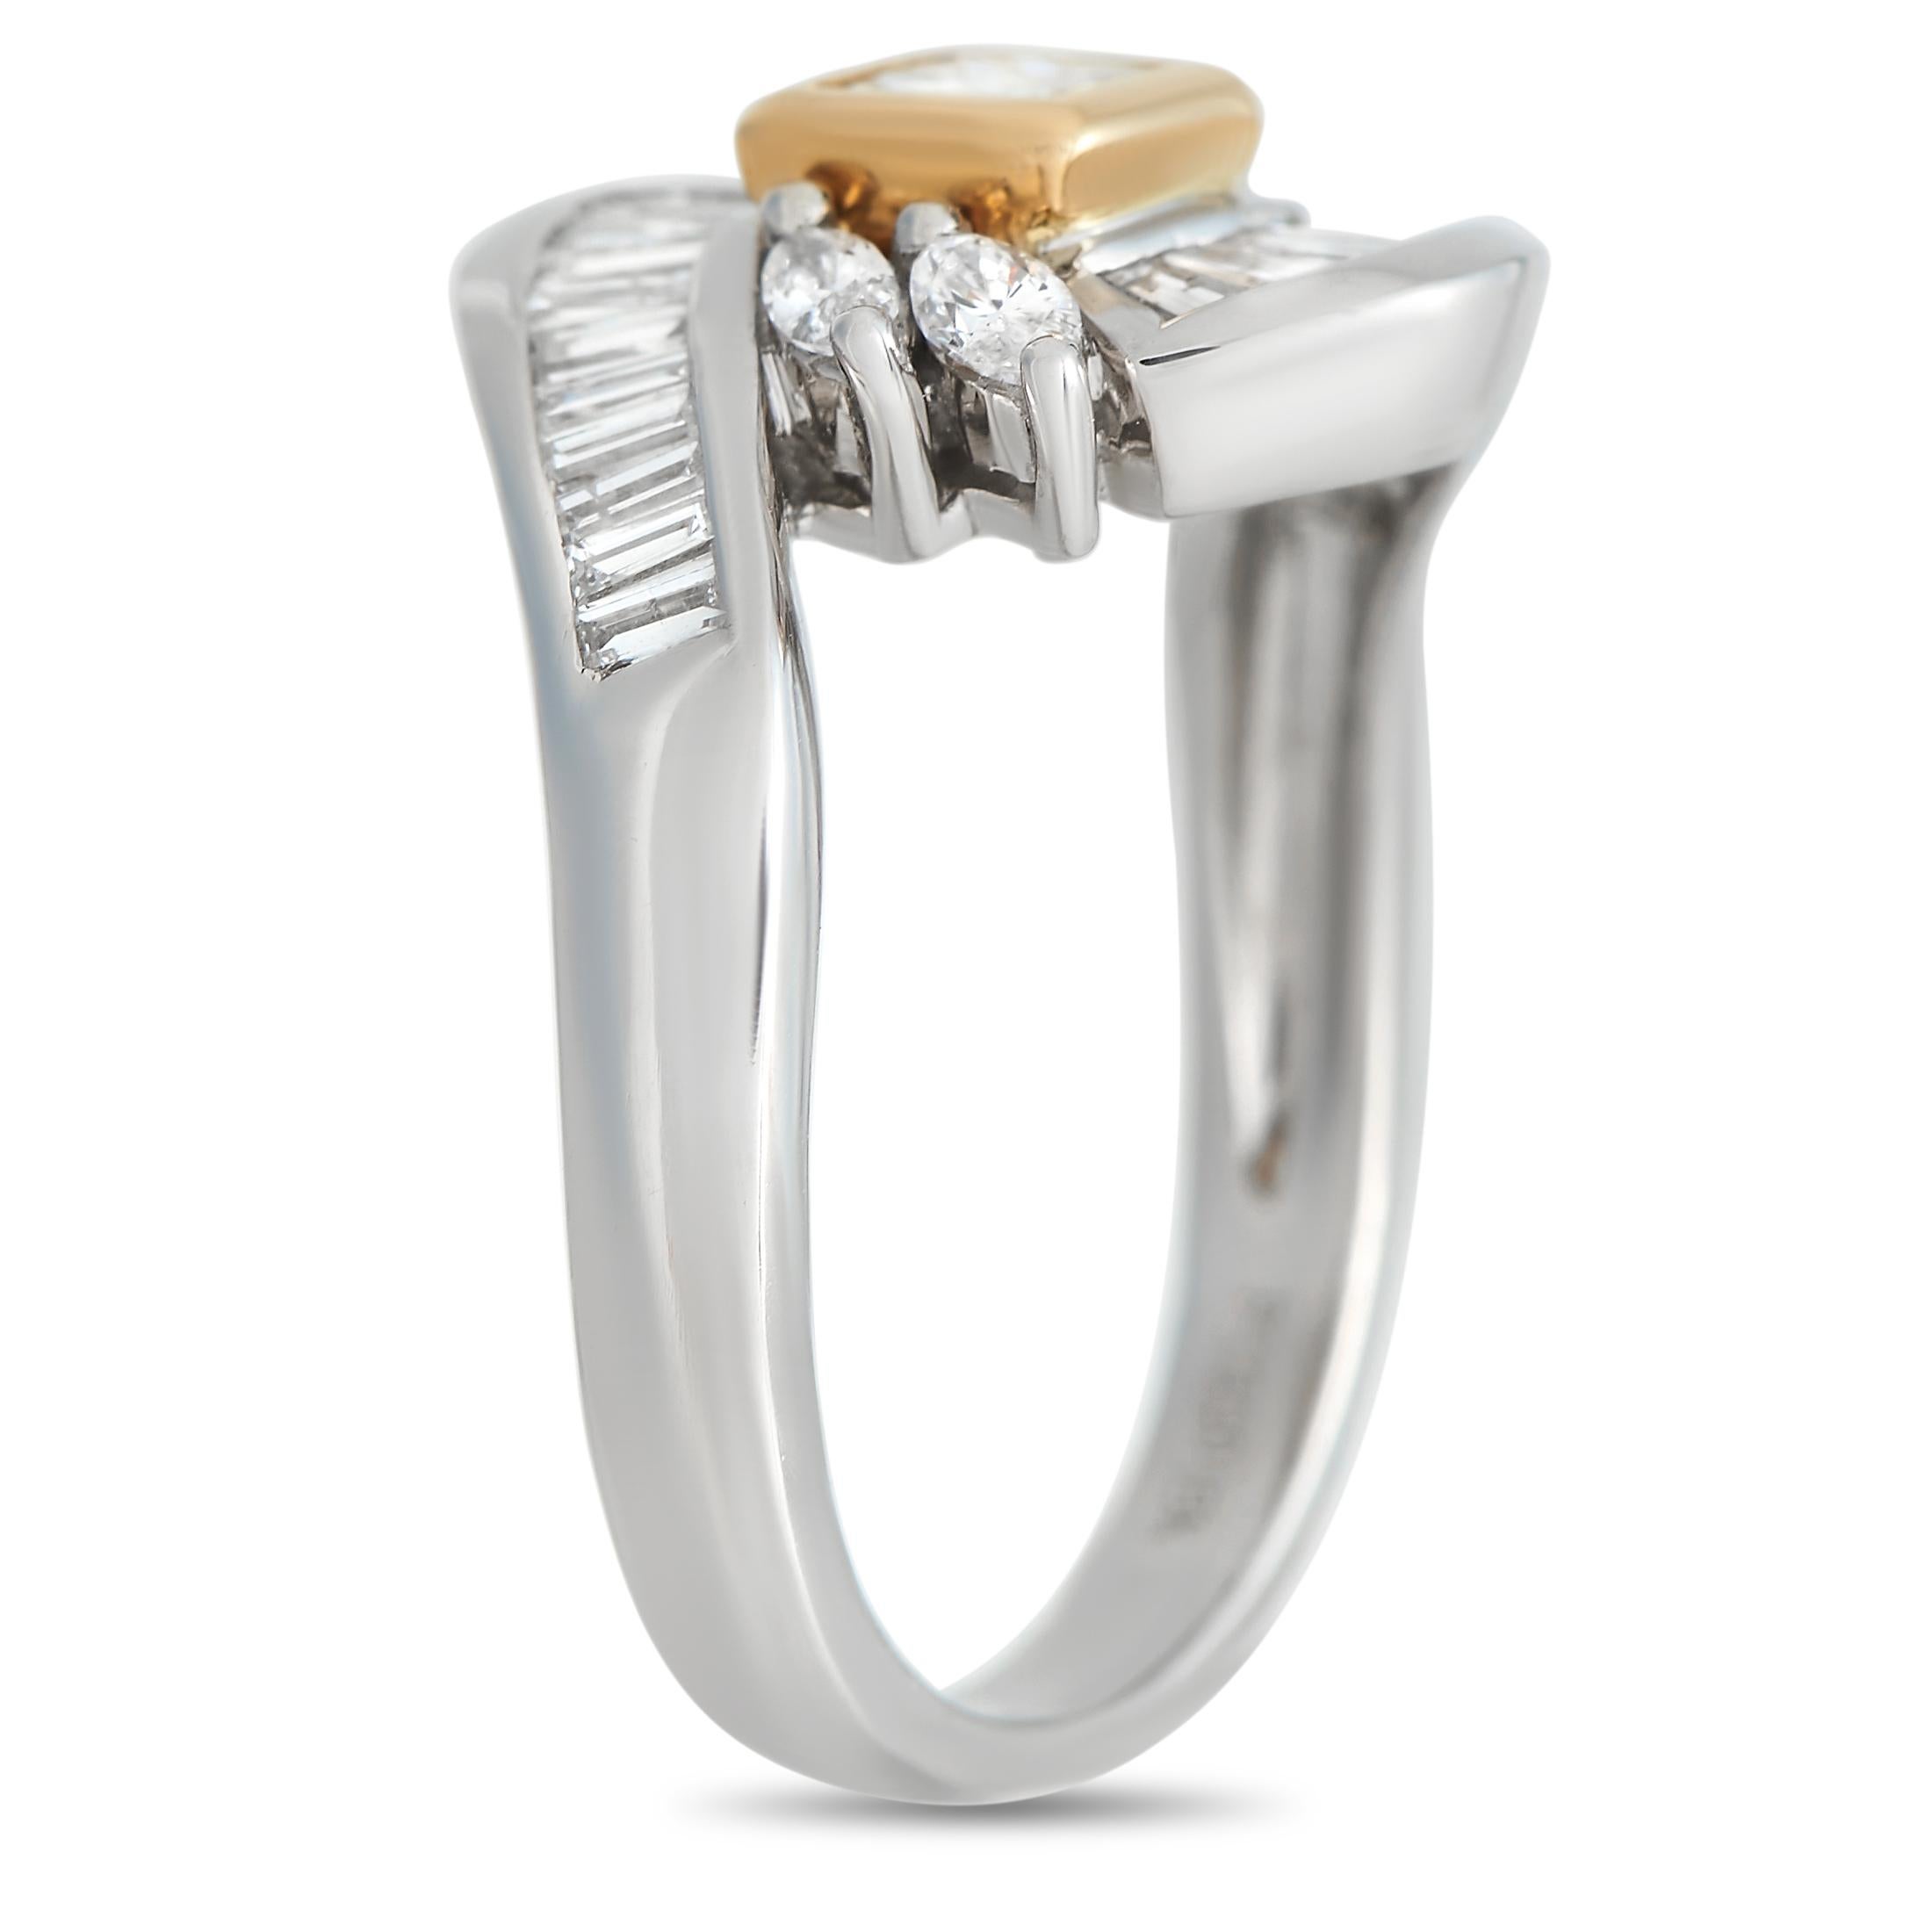 Unique details make this luxury ring simply breathtaking to behold. The dynamic platinum setting shines to life thanks to a radiant array of baguette, marquise, and princess cut diamonds with a total weight of 1.02 carats. This impeccably crafted